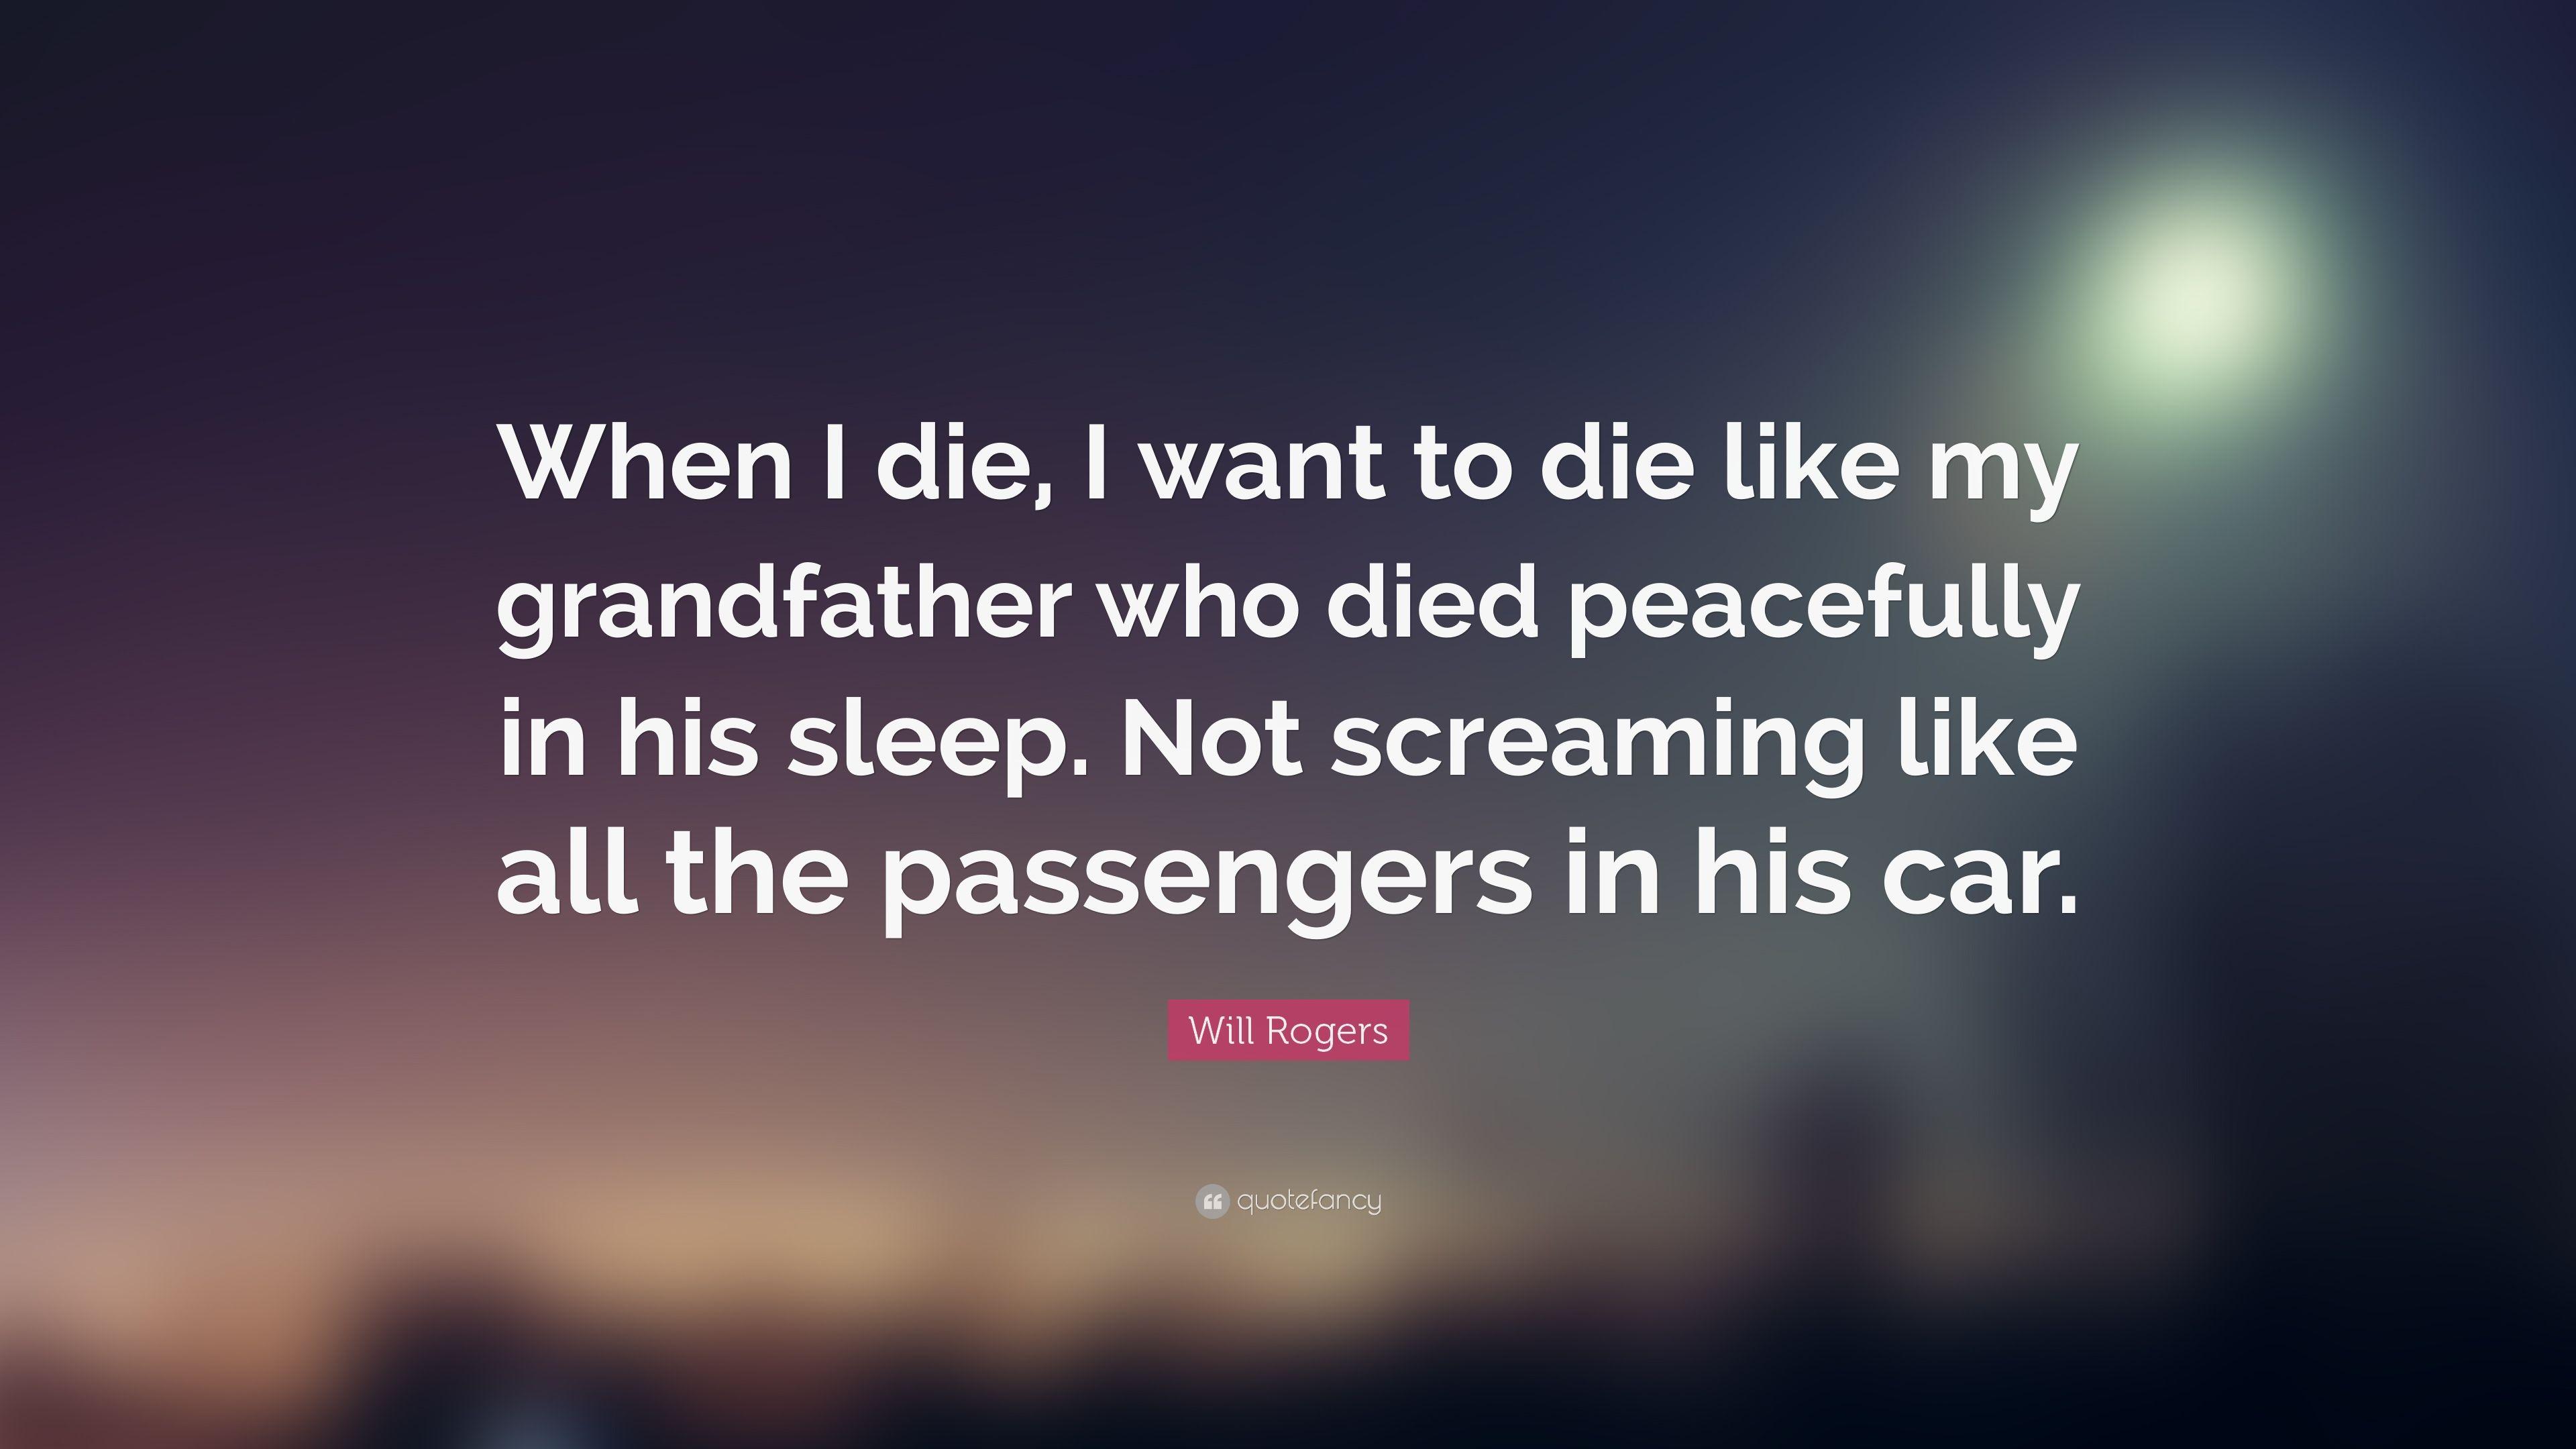 Will Rogers Quote: “When I die, I want to die like my grandfather